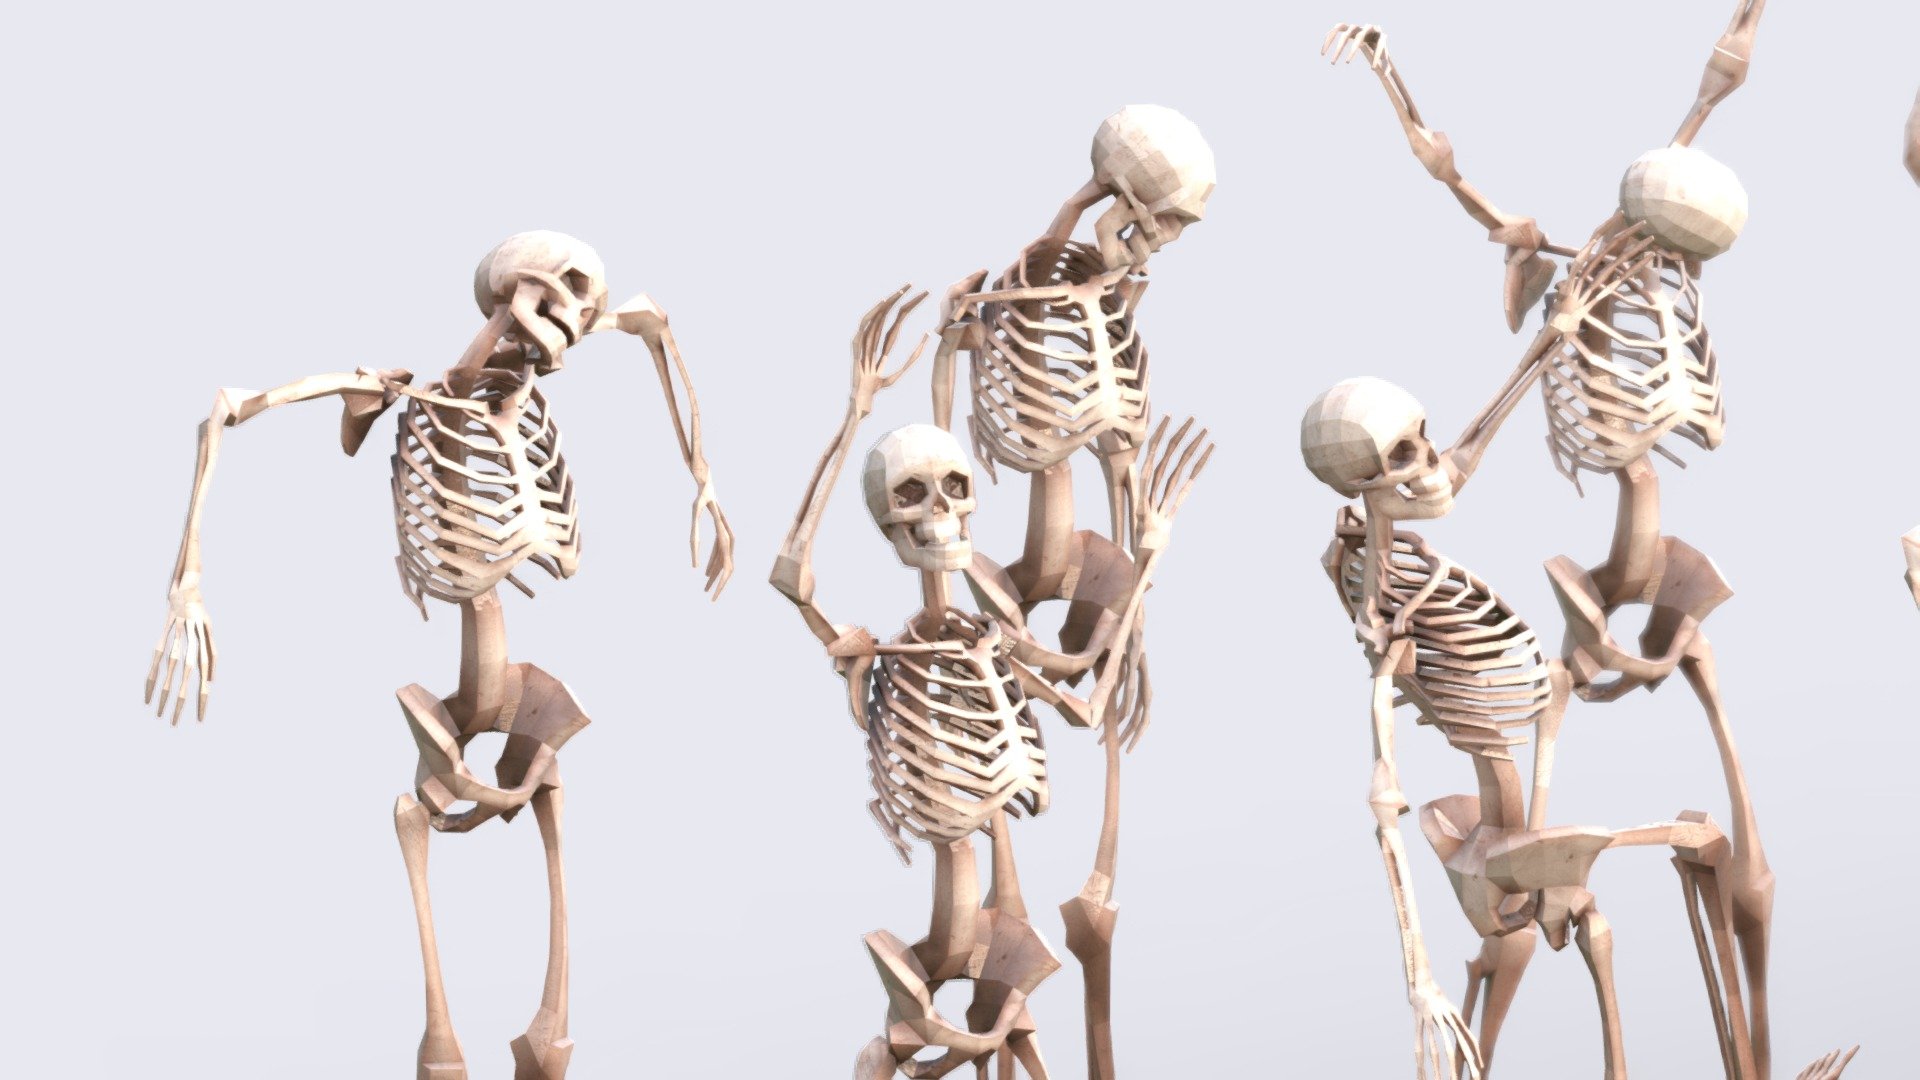 Low Poly Human Skeleton with no Loose Bones


Verts 2,337 | Edges 4,813 | Faces 2,418 | Tris 4,789 -Each Skeleton 

UVunwrapped 2K Textures: Diffuse, Albedo, Roughness, Specular, Bump

A must-have asset for 3D enthusiasts and creators. This meticulously crafted collection offers not just one, but an impressive 40 unique poses, ensuring you have all the skeletal versatility you need for your projects. What makes these skeletons truly exceptional is their watertight, single-mesh design—no loose bones, no complications. It's a seamless and efficient solution, ready for your creativity 3d model